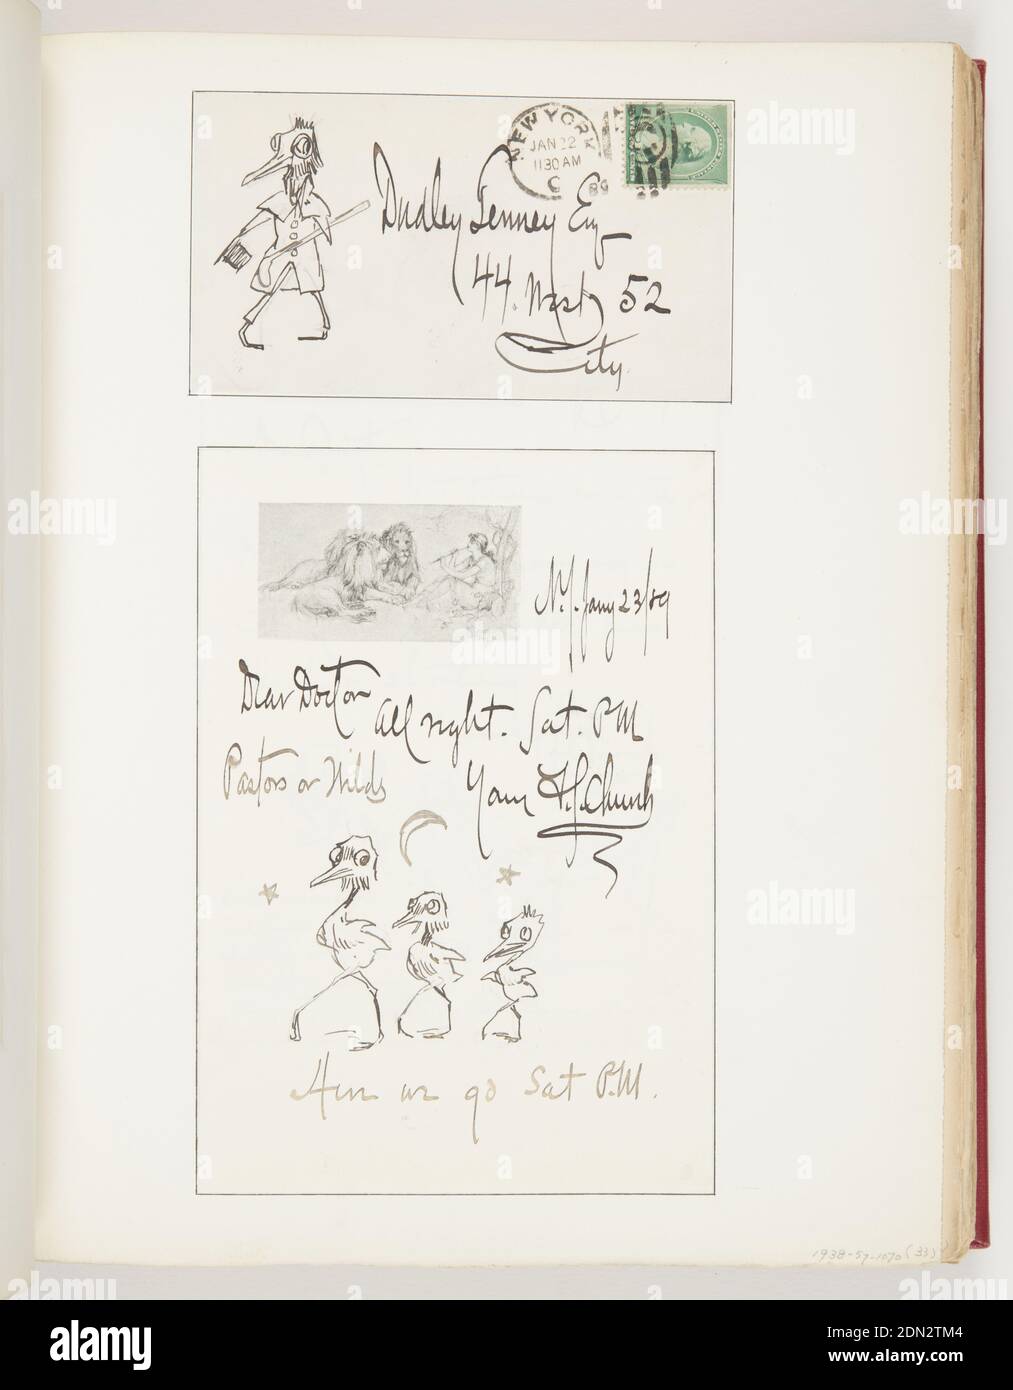 Letter to Dr. Dudley Tenney, Pen and black ink on paper, Top; front of envelope addressed to Dudley Tenney; left, bird dressed in coat with top and cane in hands. Bottom; letter addressed to Dr. Deadly; upper left, image of girl playing flute to group of lions, all sitting; lower center, three birds walking with moon and stars above., USA, 1889, ephemera, Ephemera, Ephemera Stock Photo